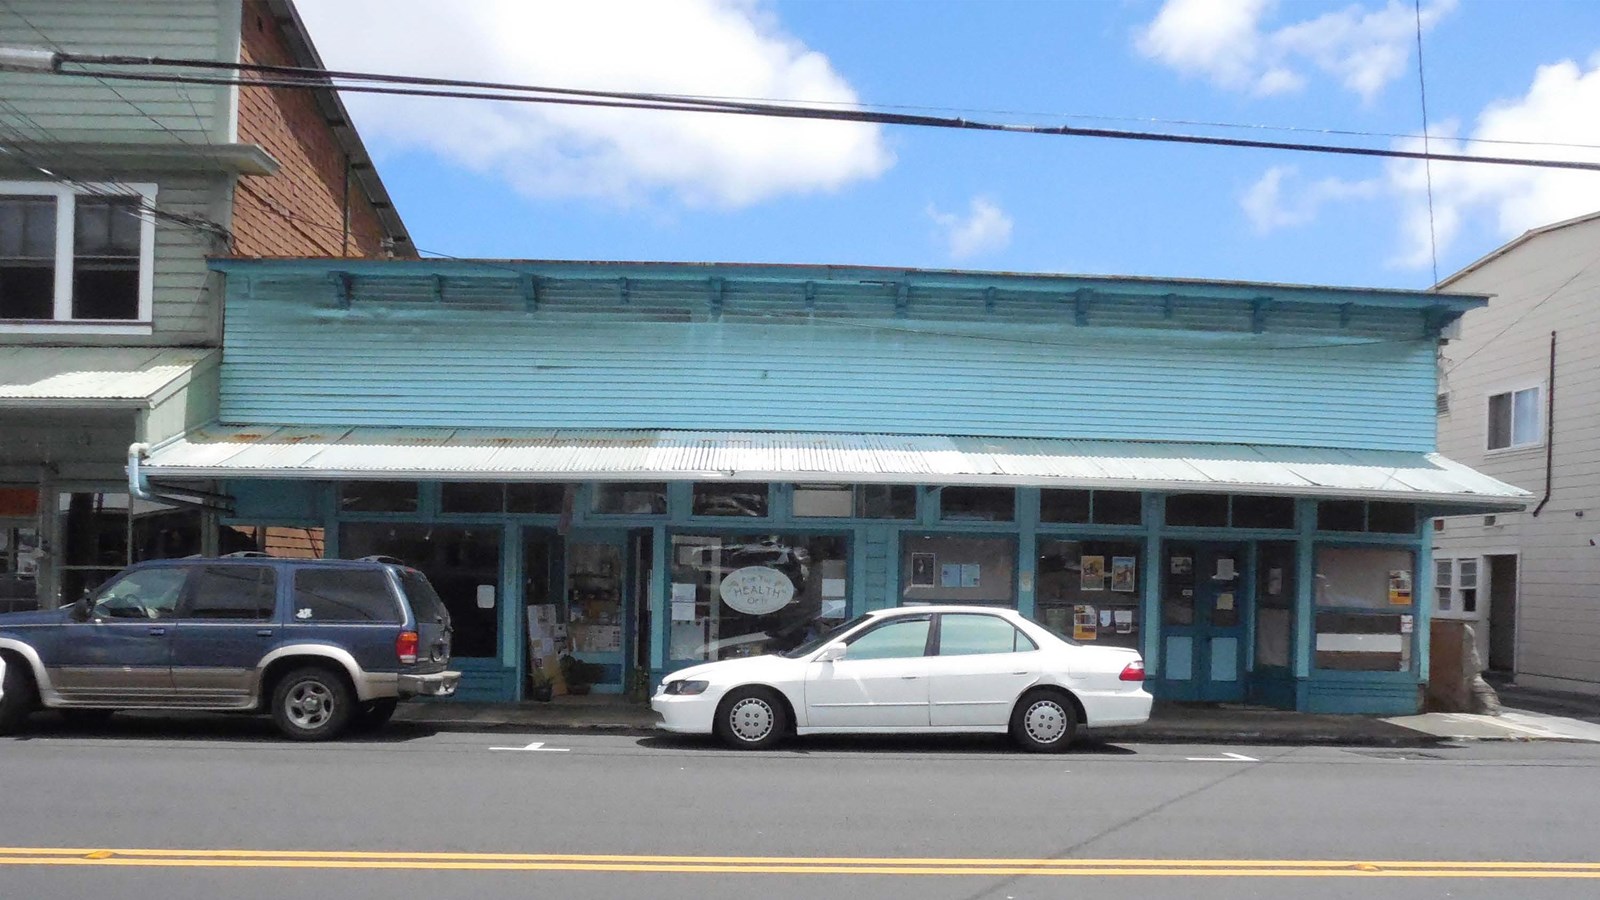 Commercial single story building on street with metal awning. 